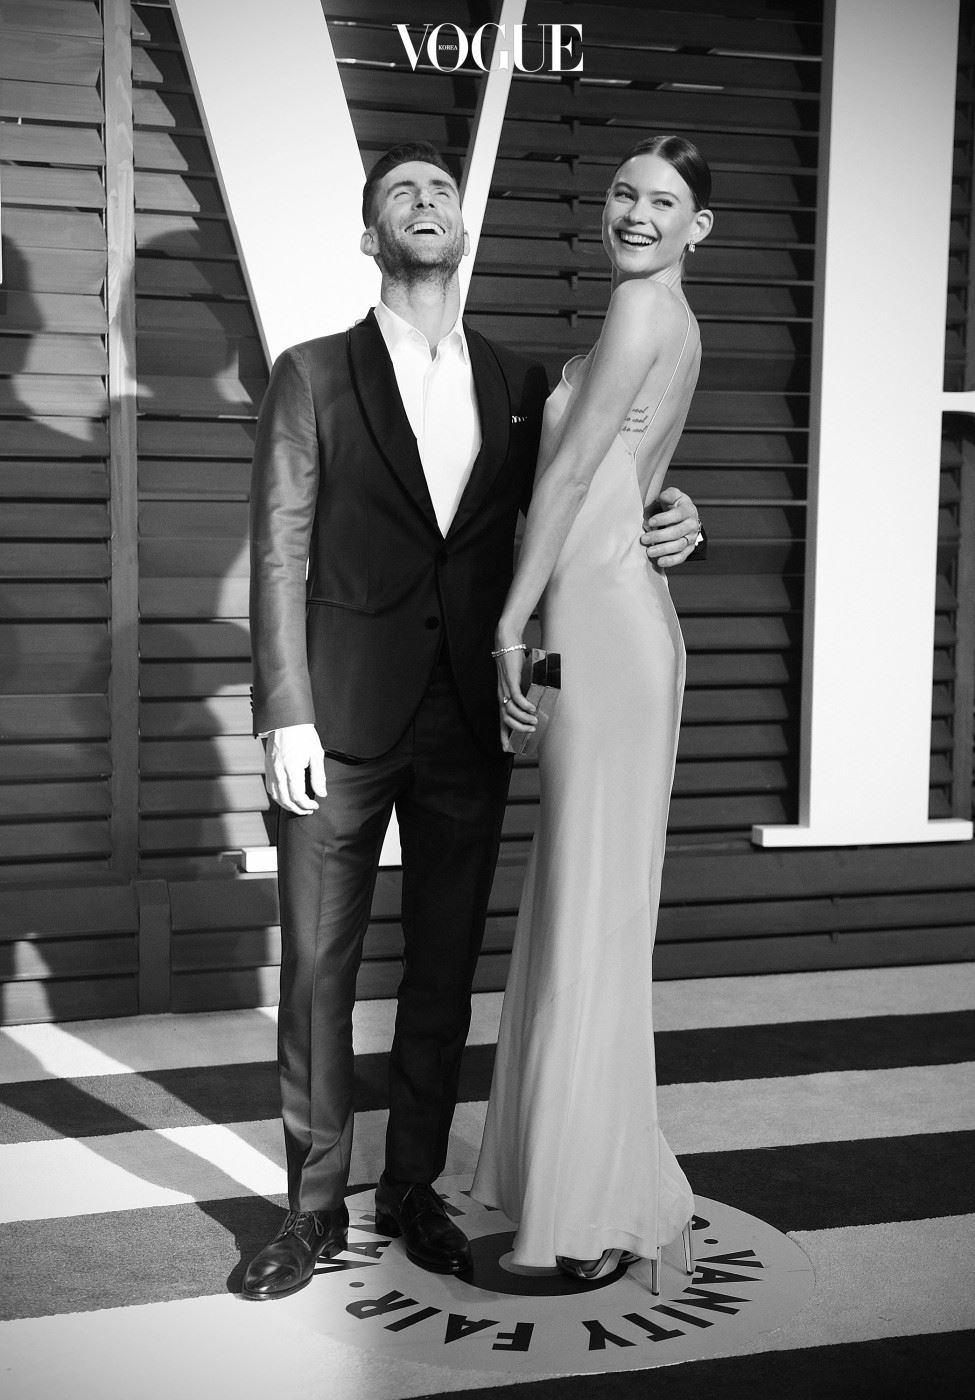 BEVERLY HILLS, CA - FEBRUARY 22:  ( Editors Note: Image processed using digital filters )  Singer Adam Levine and wife Behati Prinsloo attend the 2015 Vanity Fair Oscar Party at Wallis Annenberg Center for the Performing Arts on February 22, 2015 in Beverly Hills, California.  (Photo by Jason Kempin/Getty Images)